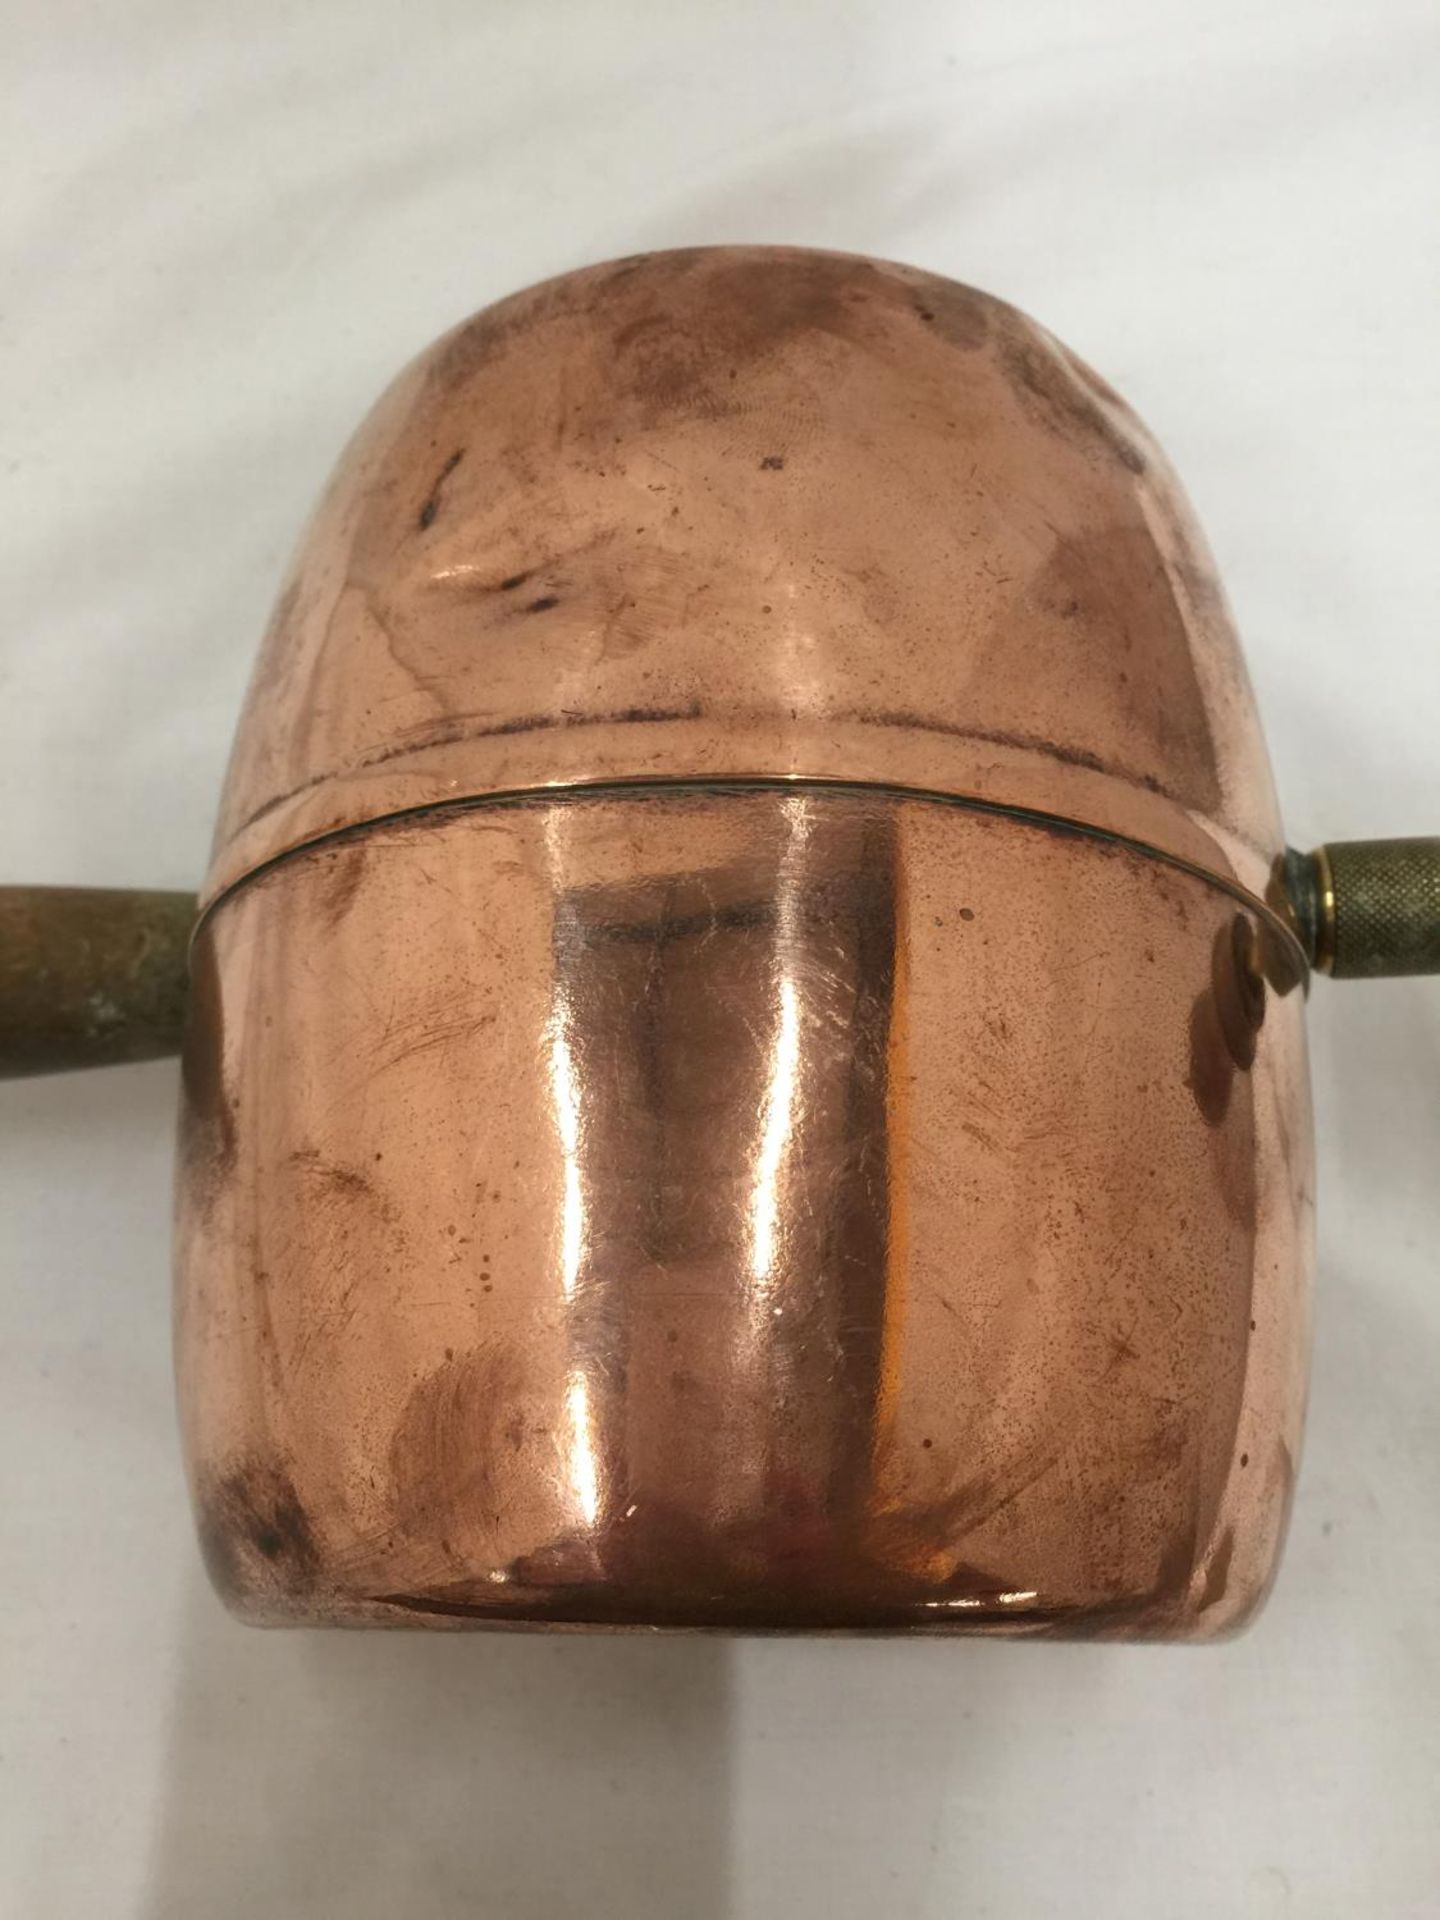 A VINTAGE COPPER SPRAYER MADE IN SWITZERLAND - Image 4 of 4